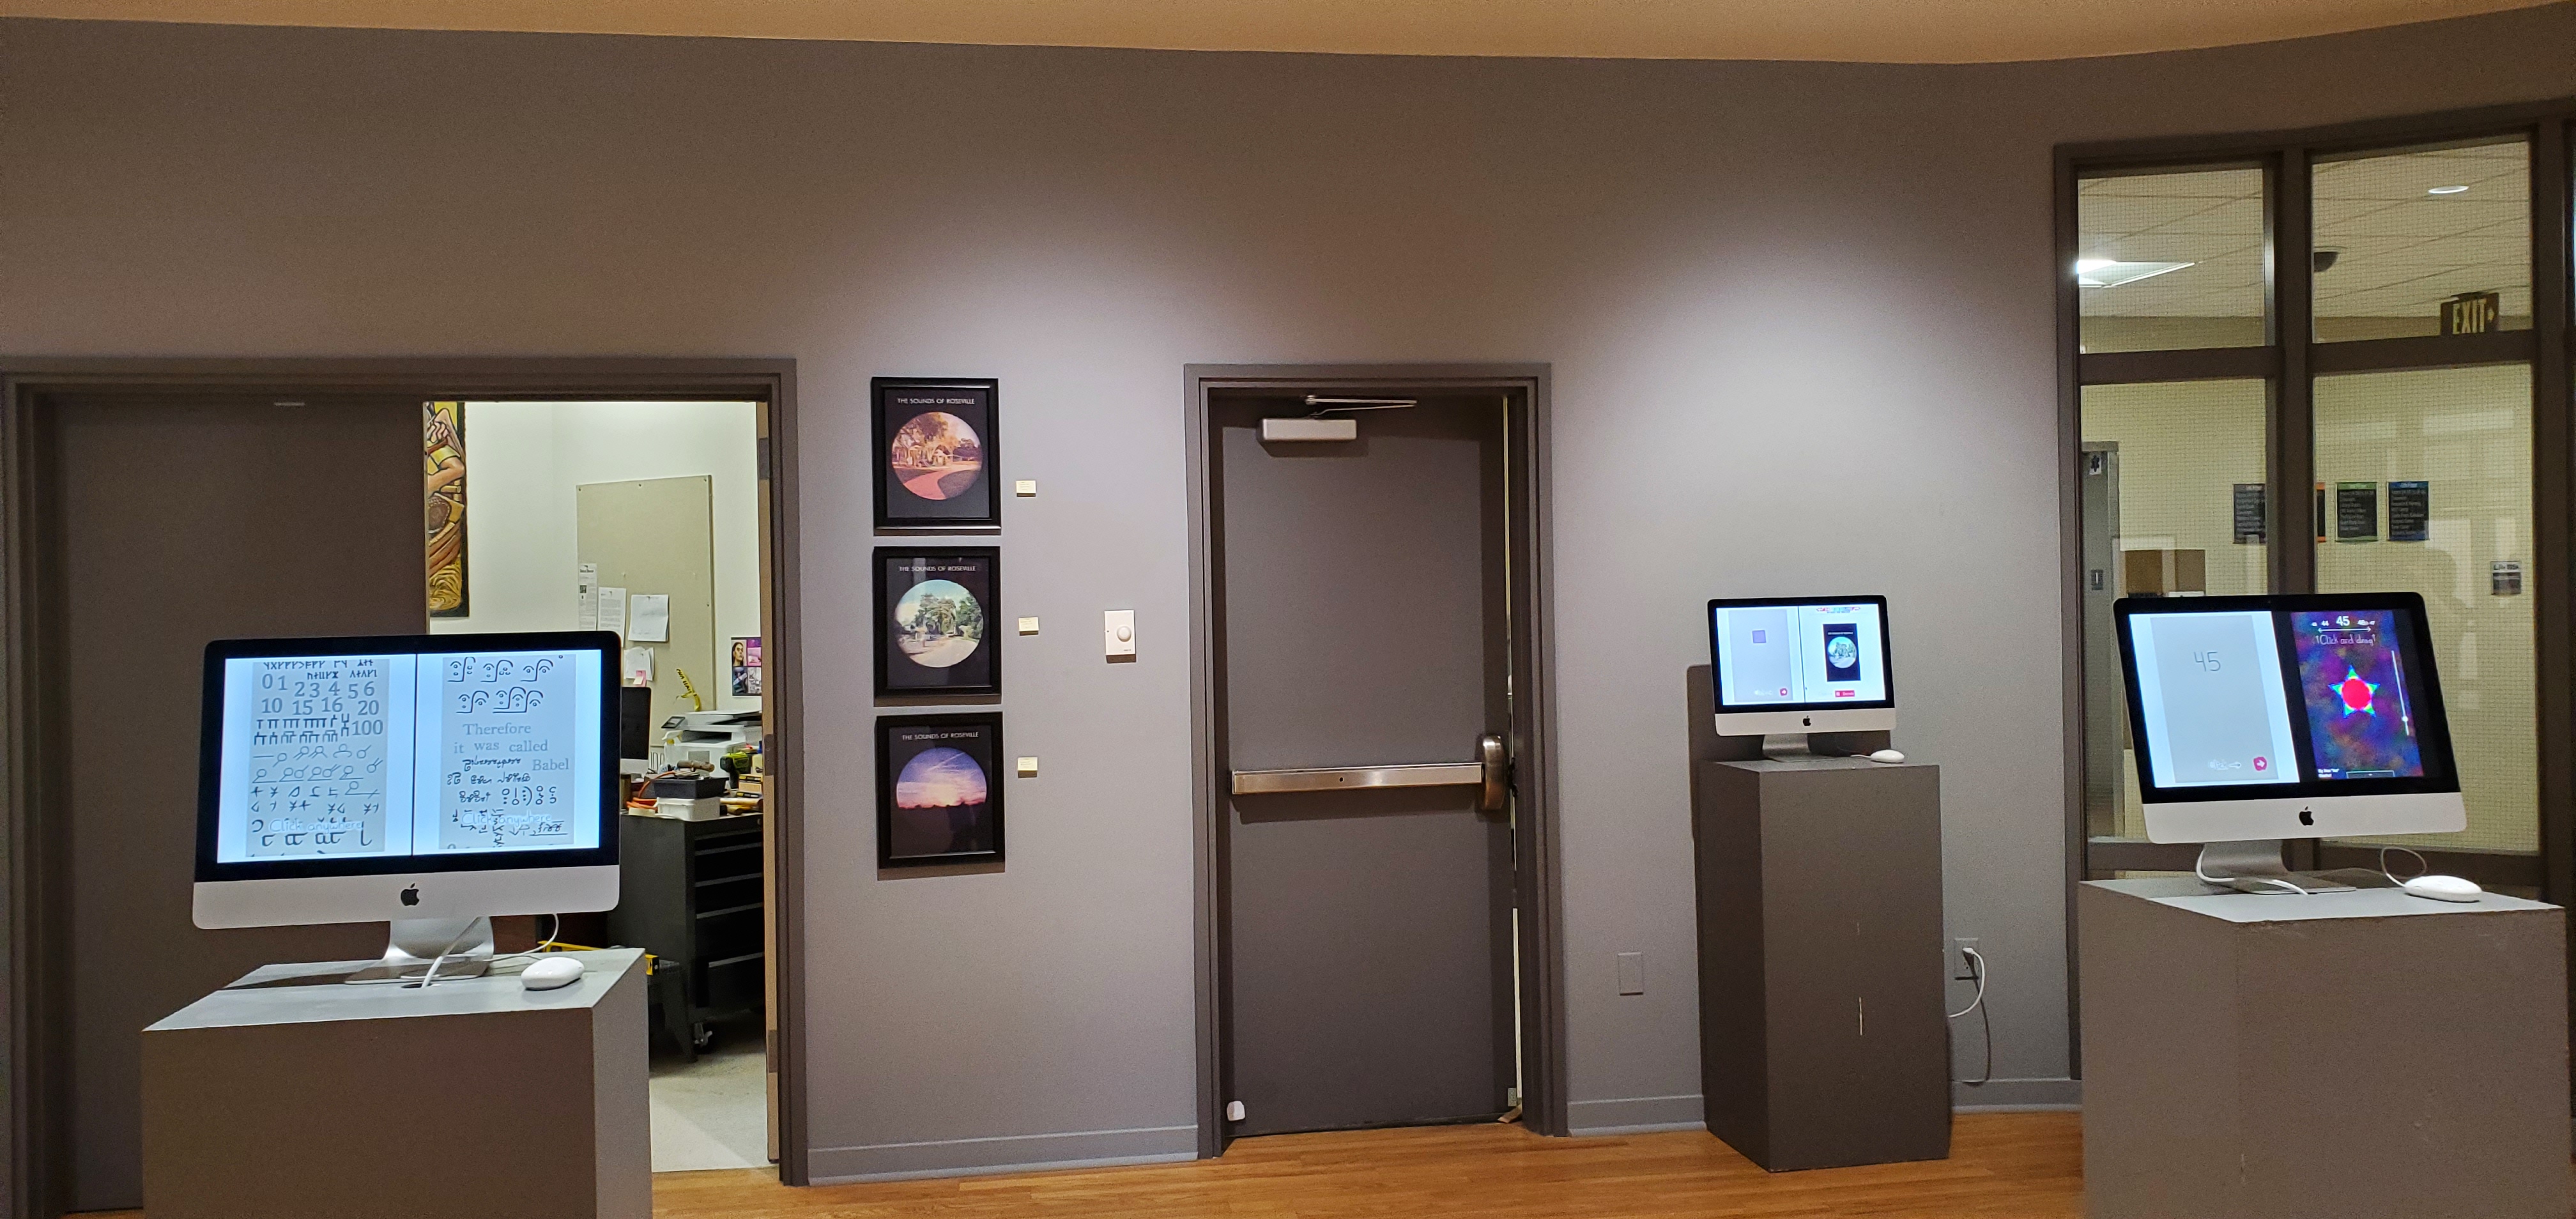 The Ridley art gallery, with my projects displayed on monitors sitting on pedastals, and The Sounds of Roseville prints mounted on the wall.